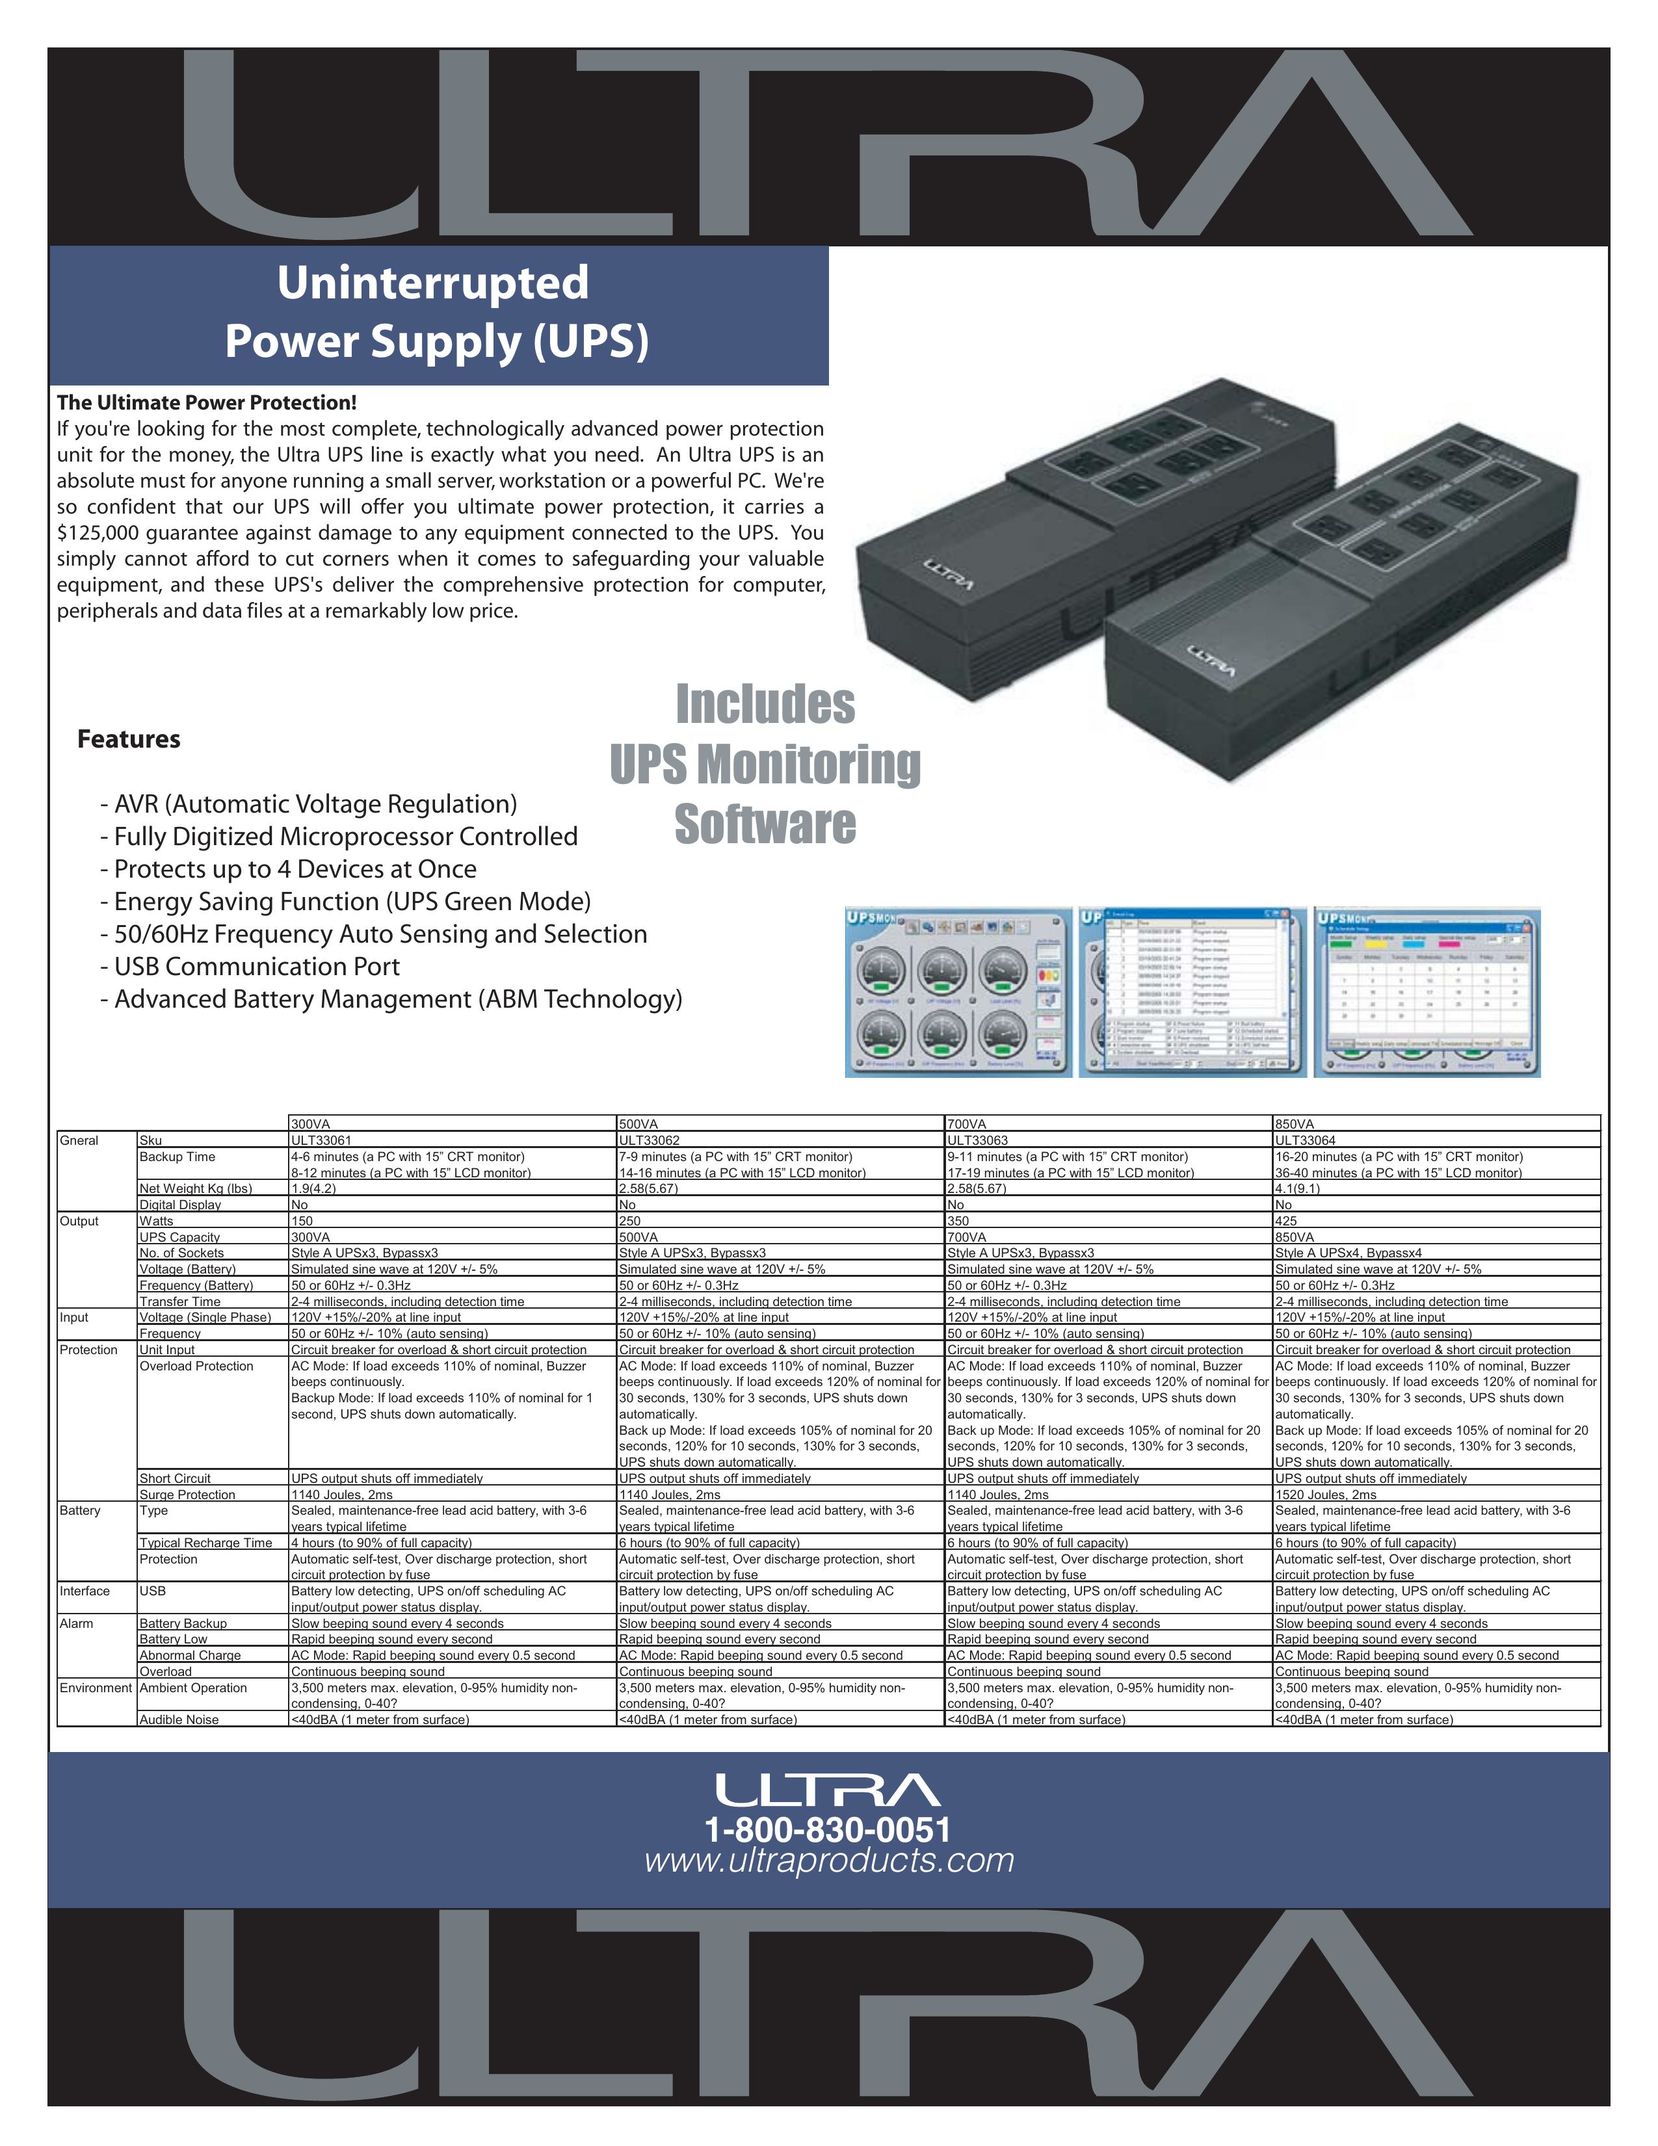 Ultra Products ULT33064 Power Supply User Manual